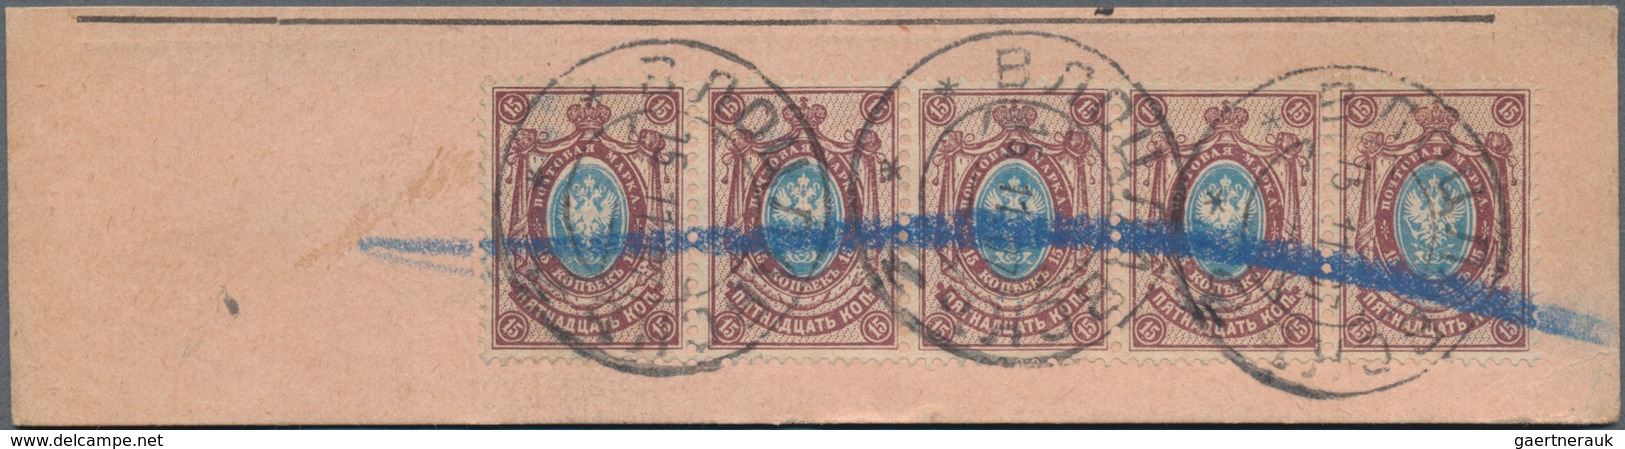 Russland: 1900's-1910's: Much more than 1000 parts of parcel cards, obviously all franked by 1889-19